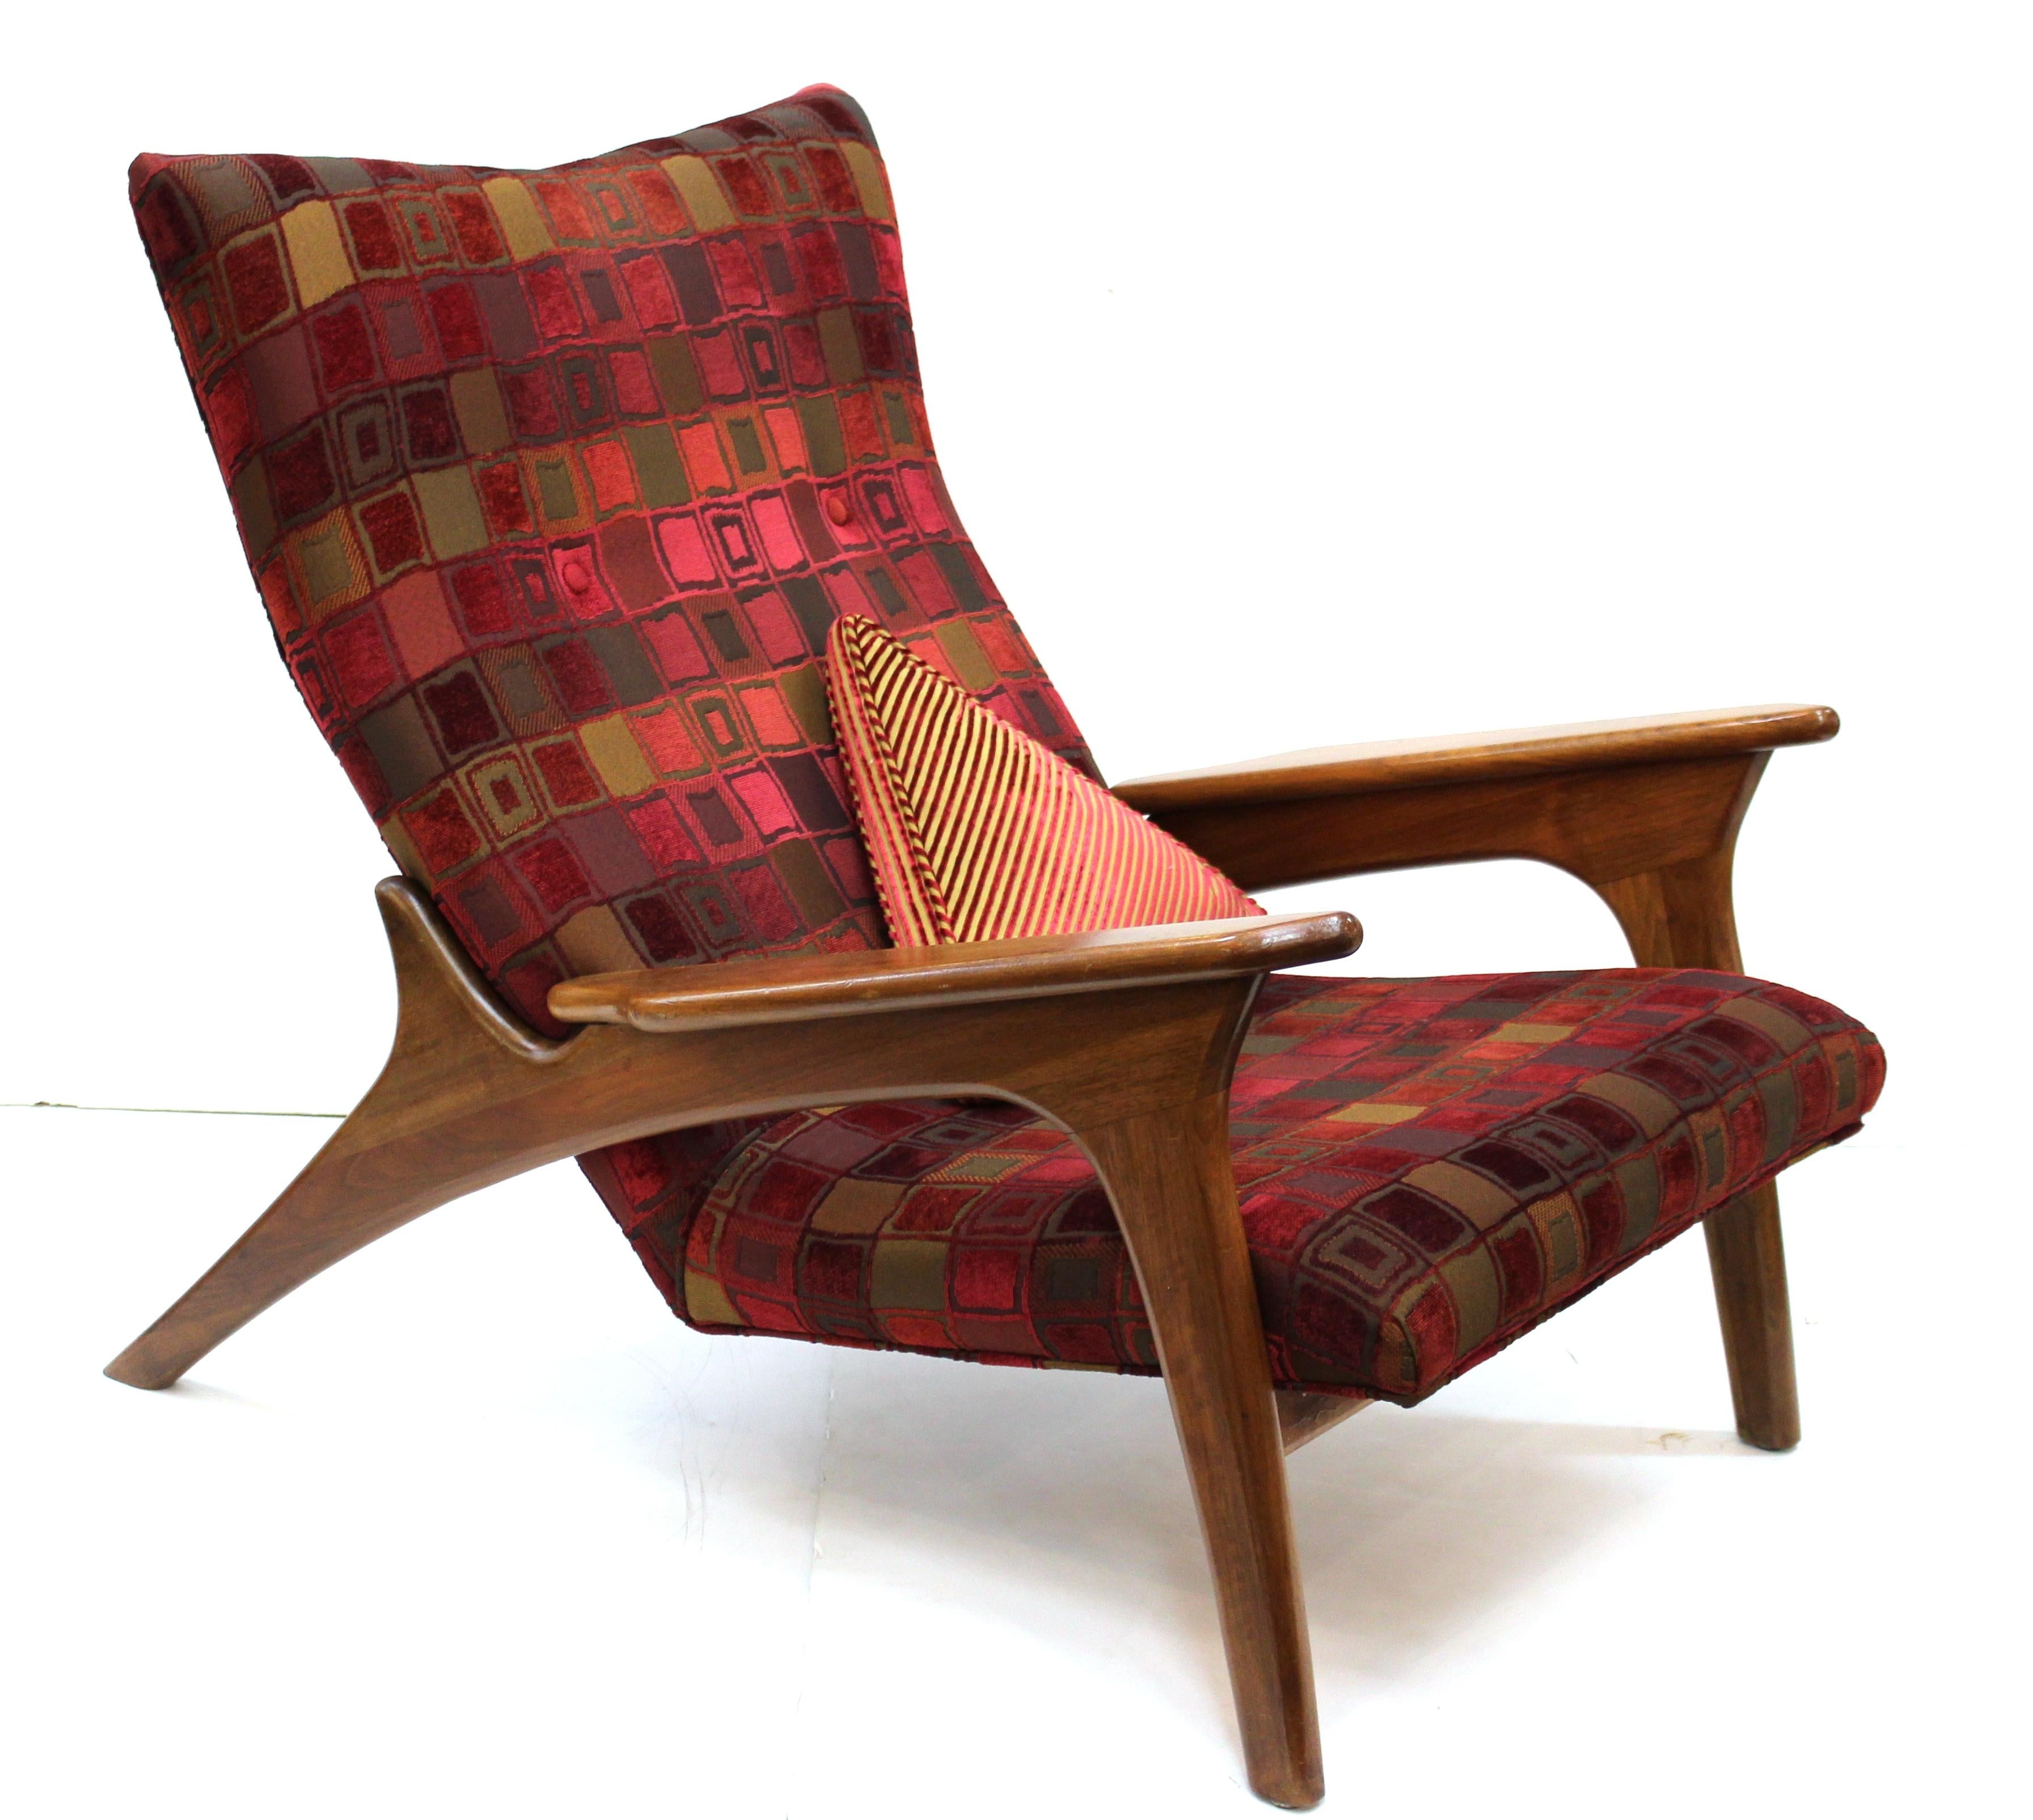 Adrian Pearsall for Craft Associates Mid-Century Modern lounge chair with ottoman, model 990-LC, made with a walnut frame. Comes with a small triangular designer cushion. The set is in great vintage condition, with age-appropriate wear to the wood.